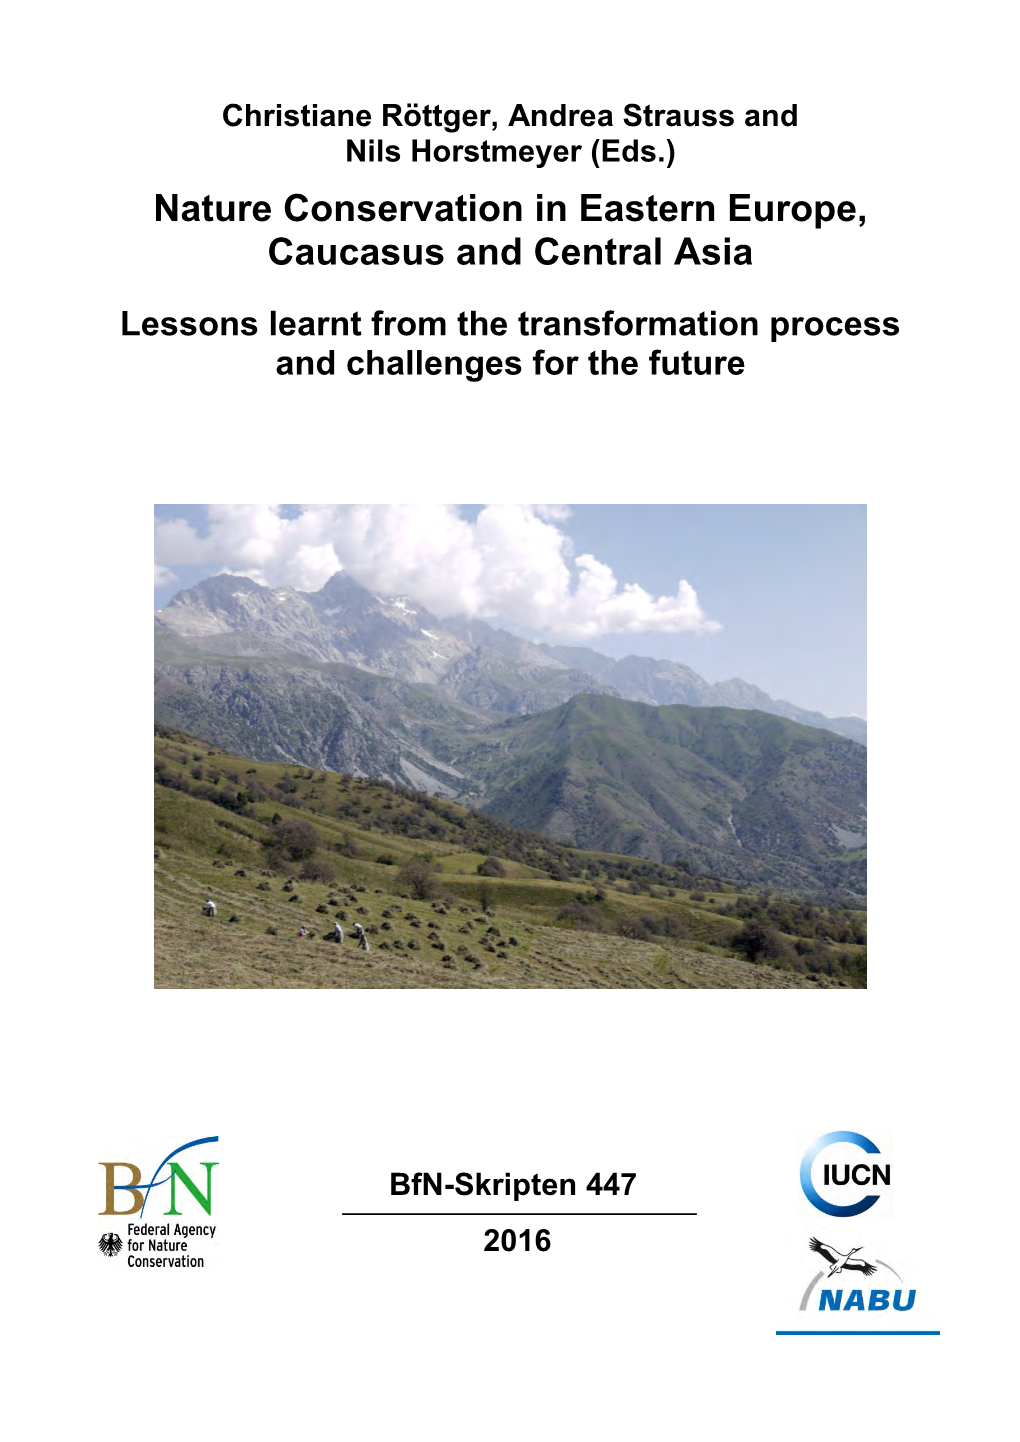 Nature Conservation in Eastern Europe, Caucasus and Central Asia